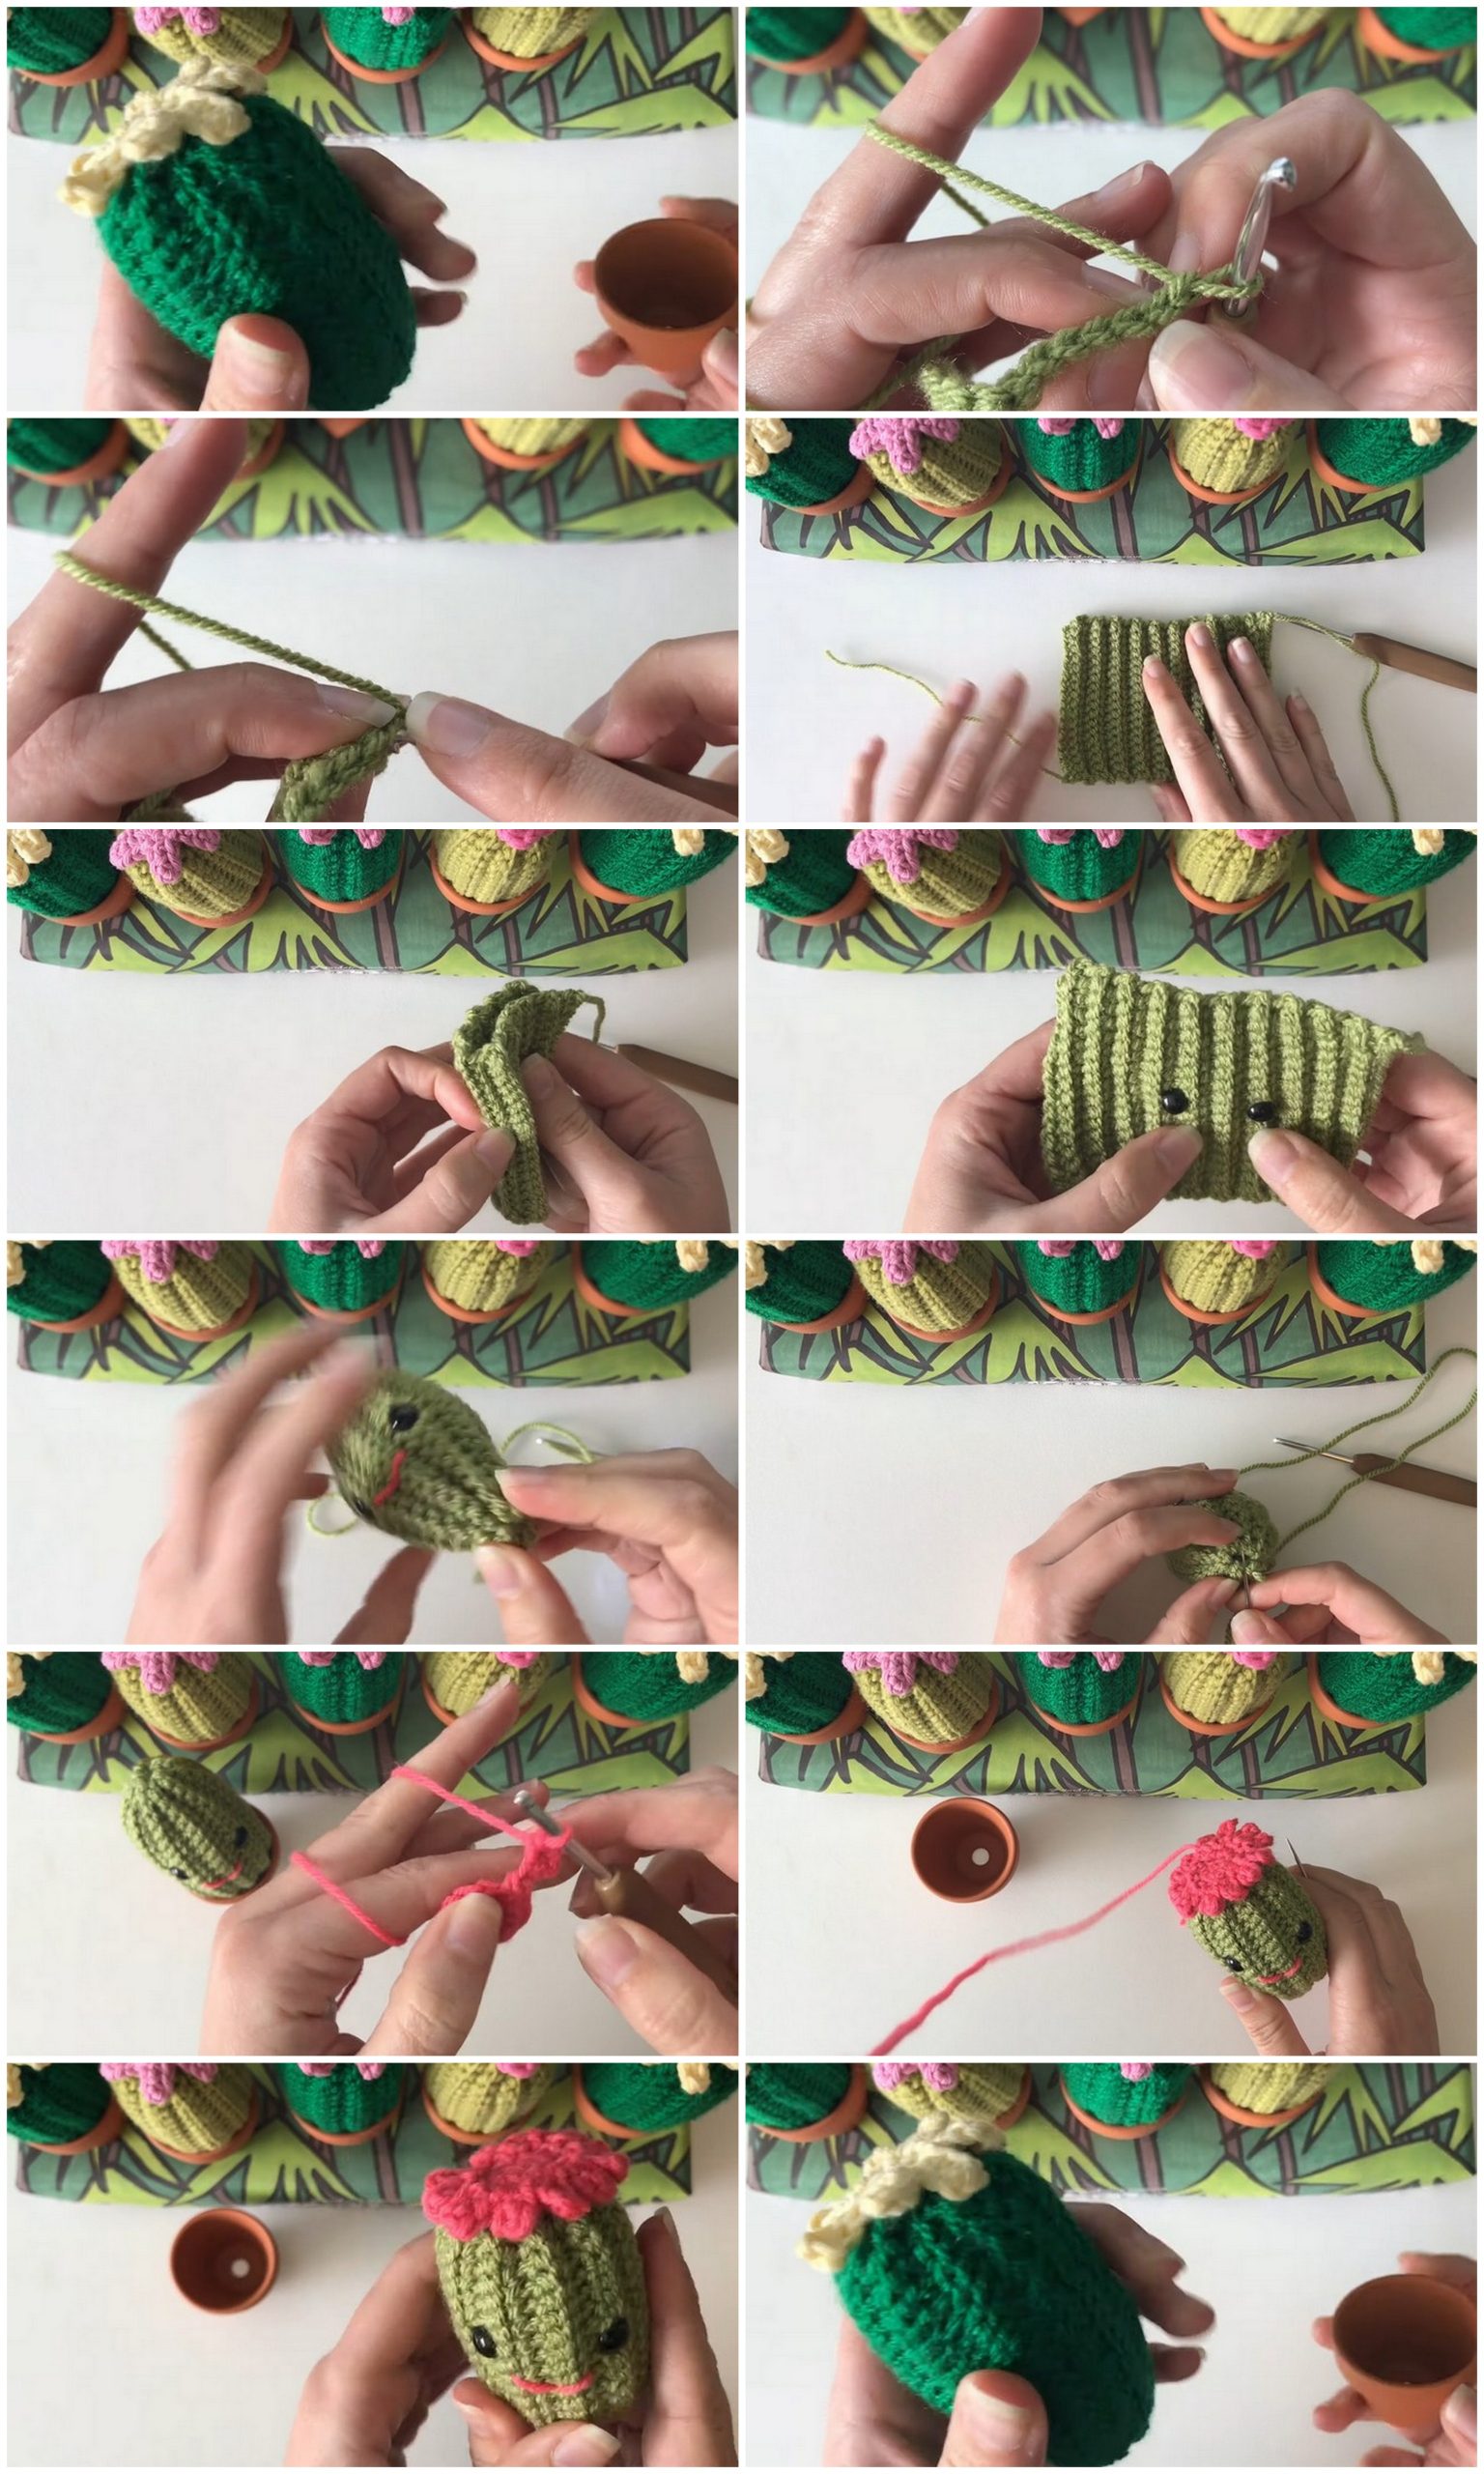 How to Crochet a Cactus for Beginners